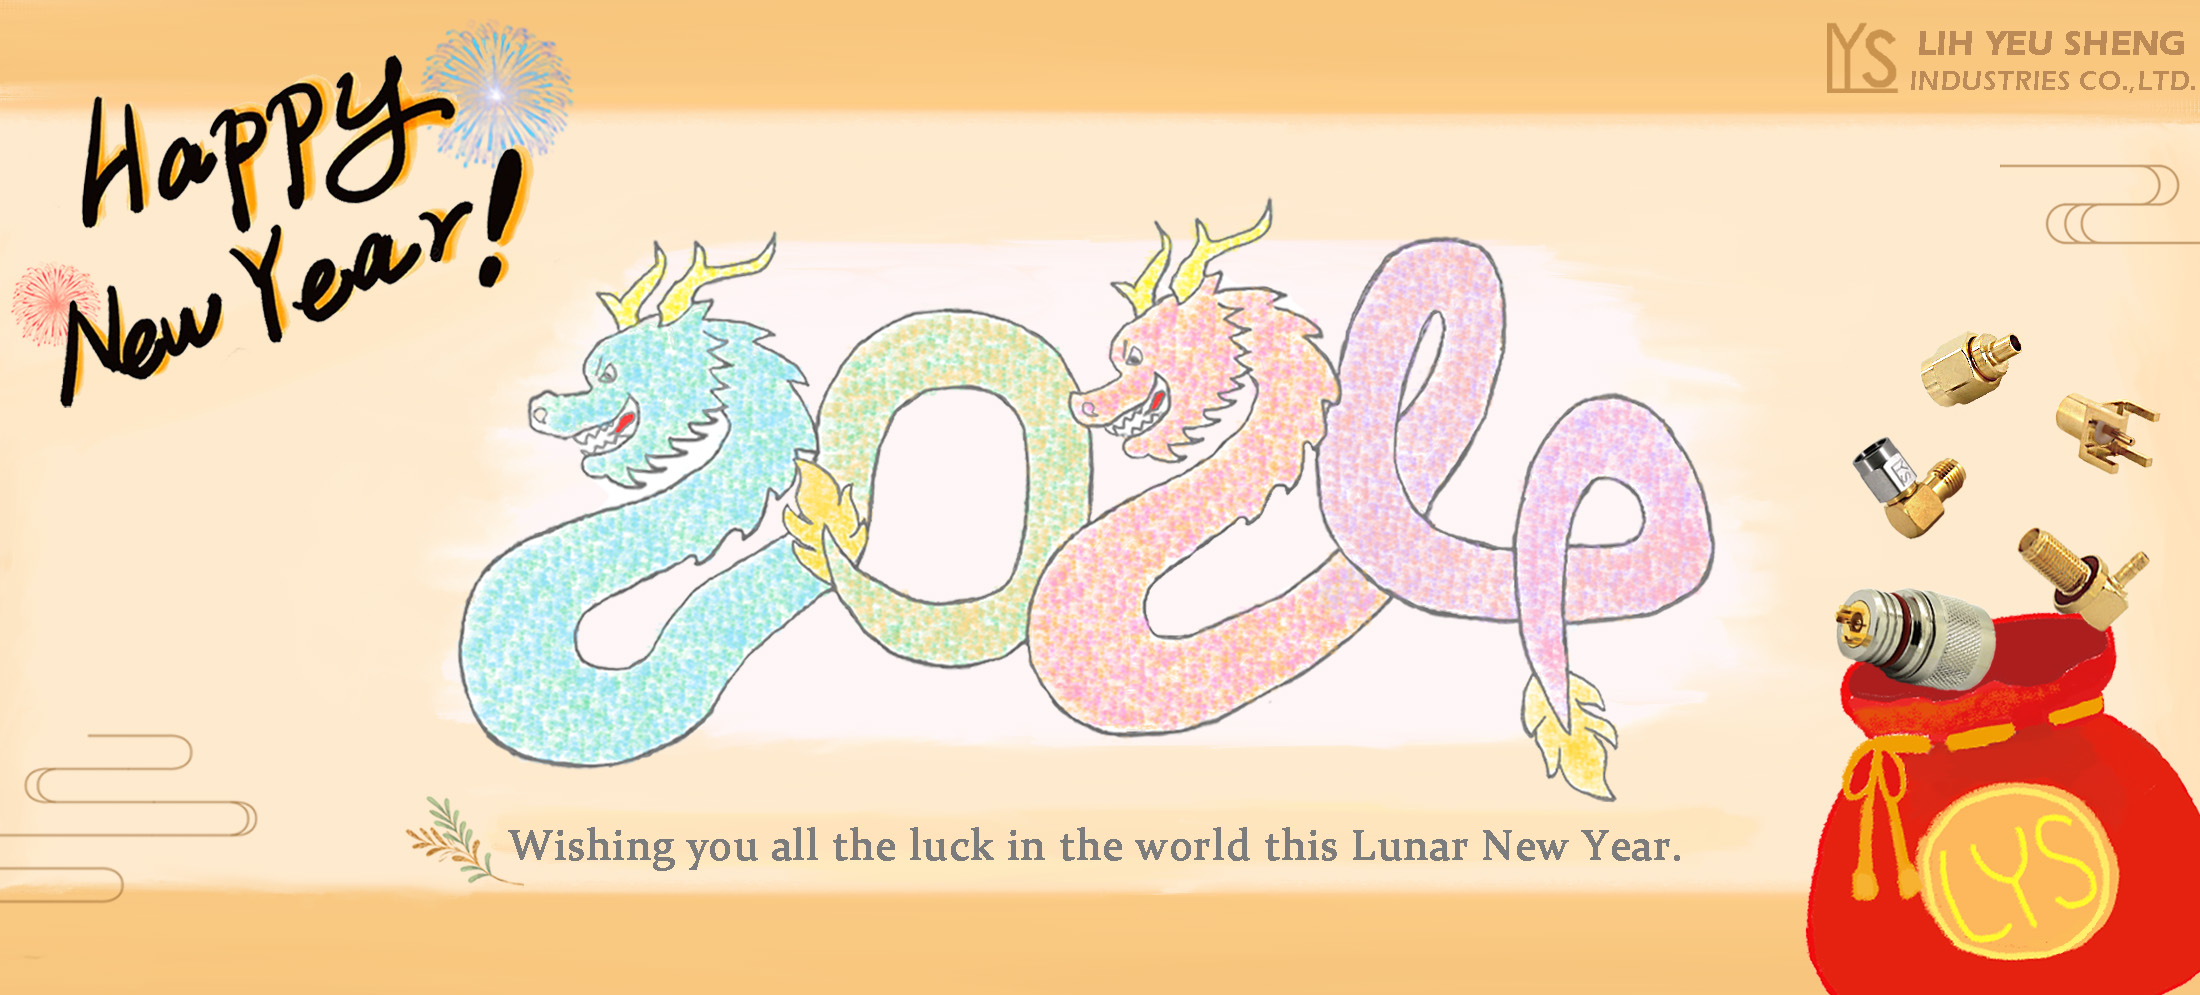 LYS Wish You Happy Chinese New Year of the Dragon